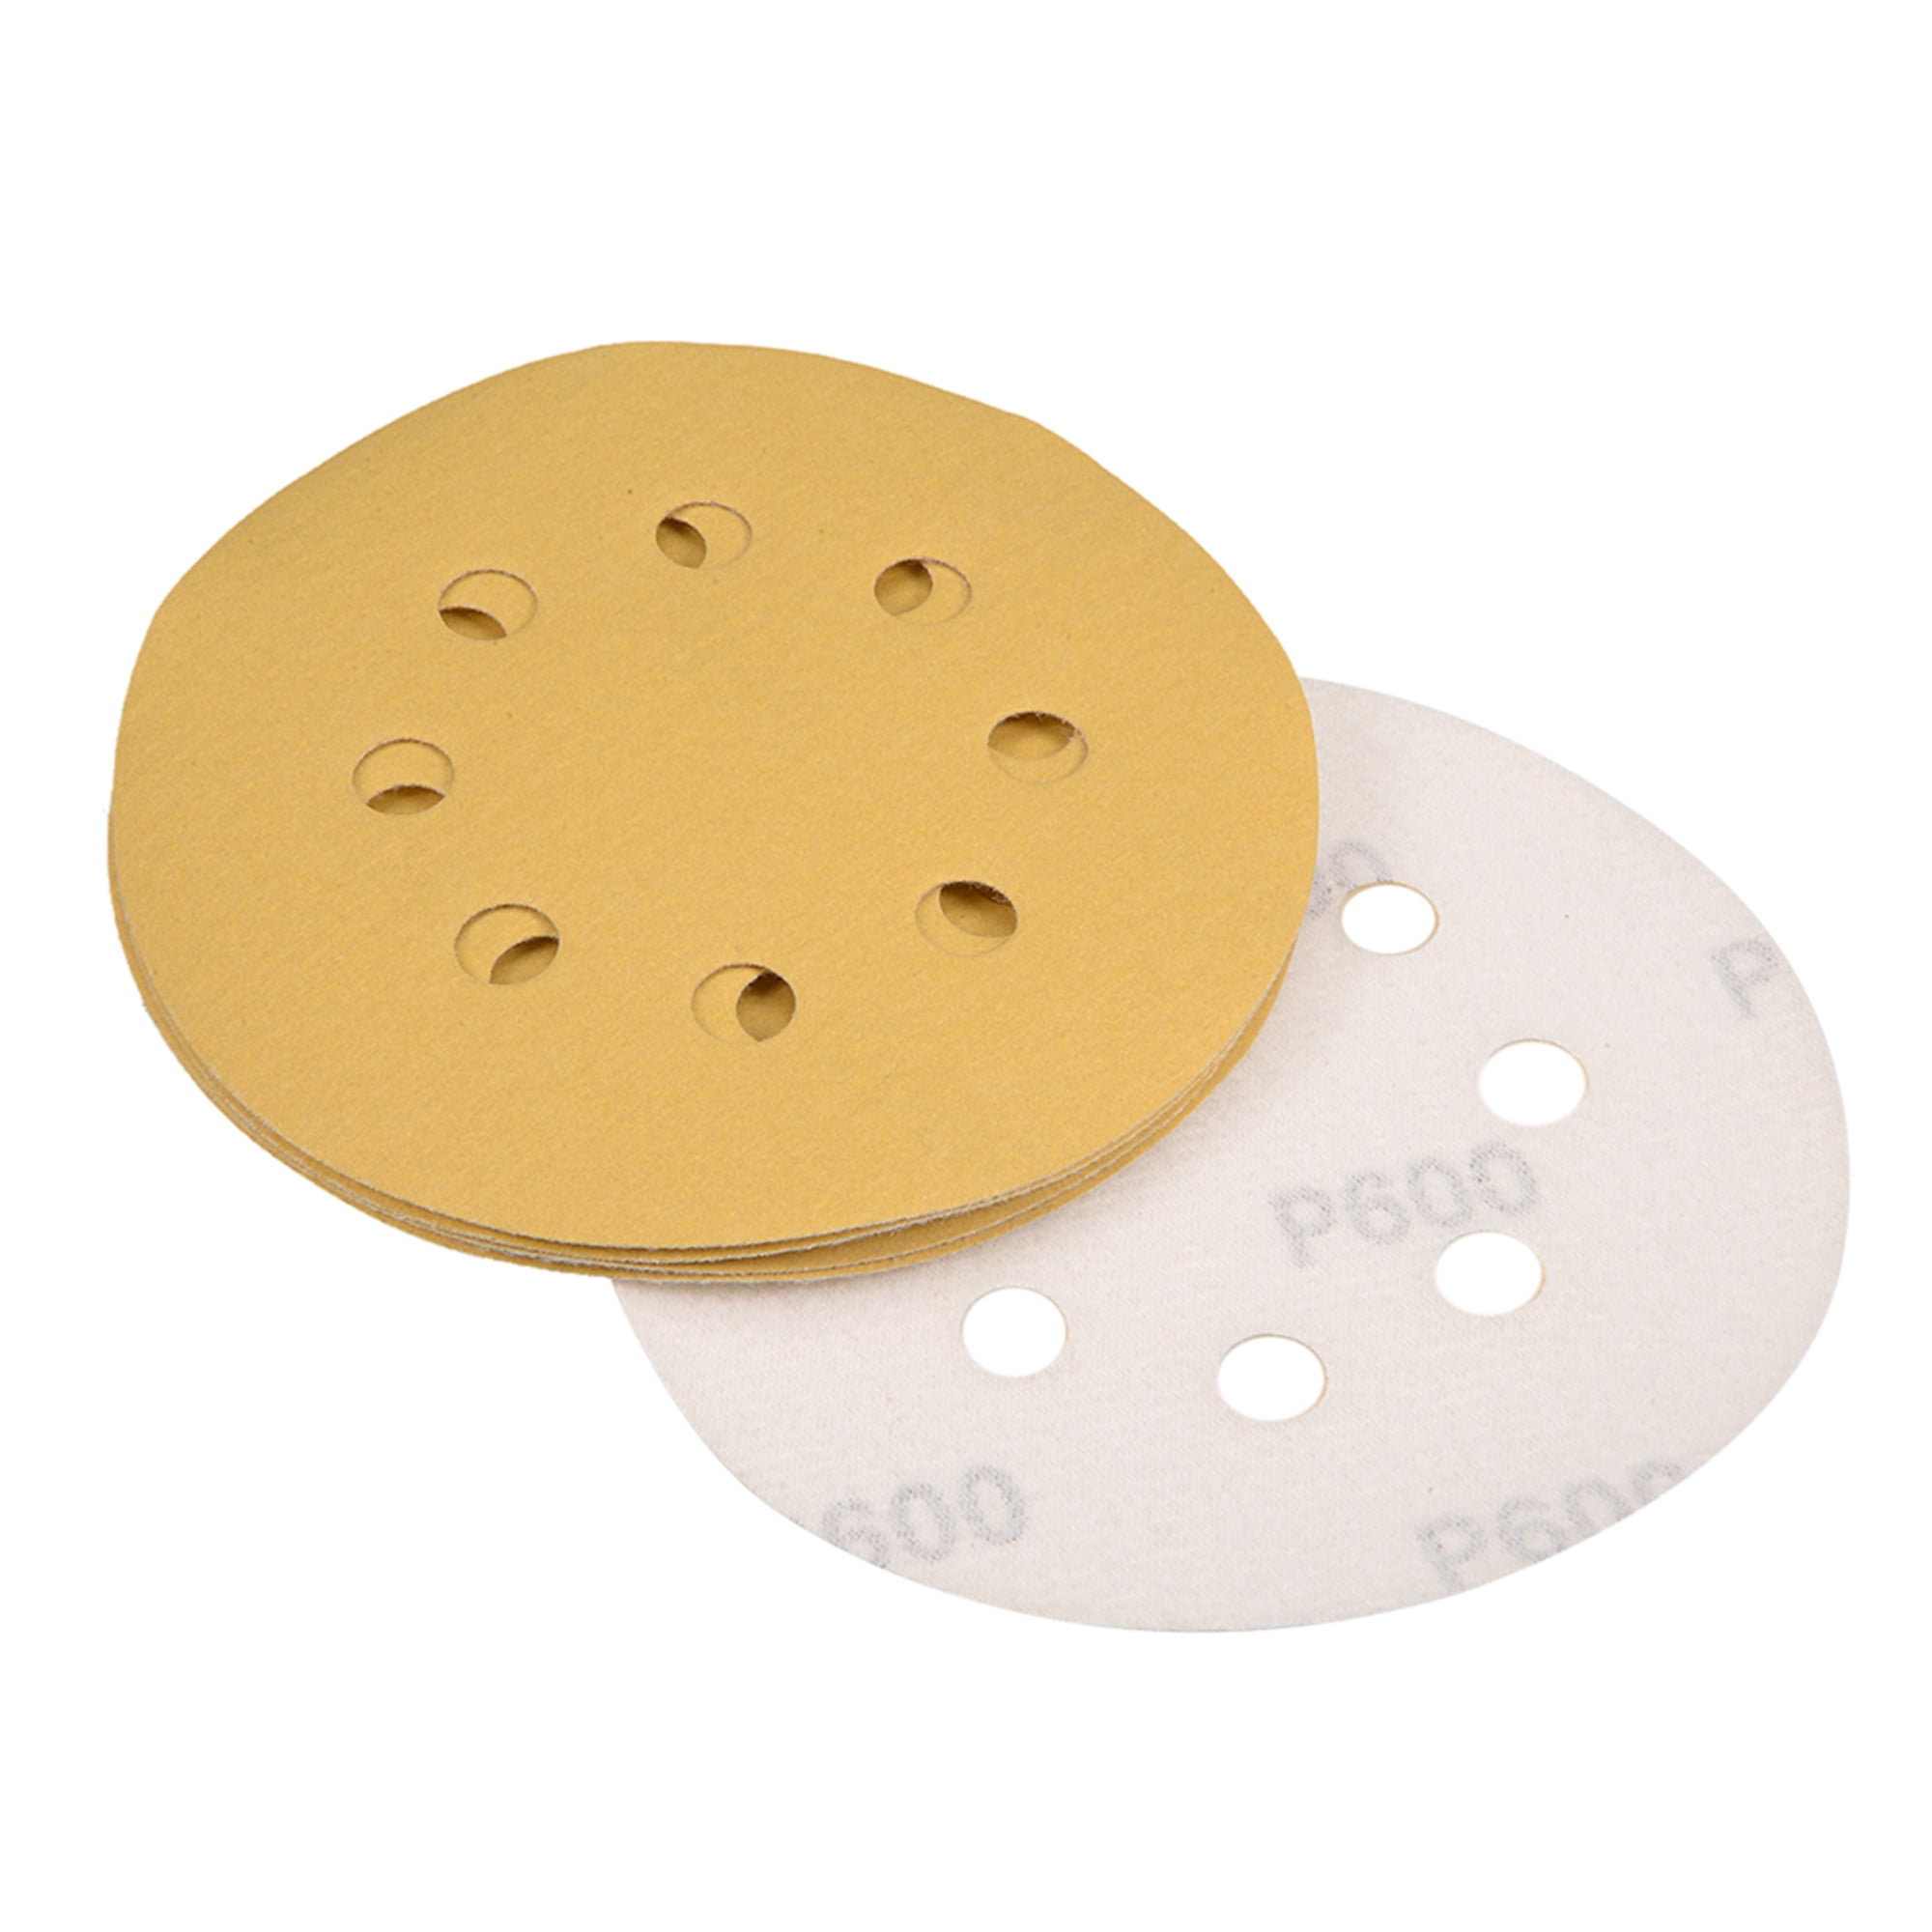 40-5000 Grit 7 Inch Hook And Loop Sand Paper Sanding Disc 180mm Dia Pad Flocking 